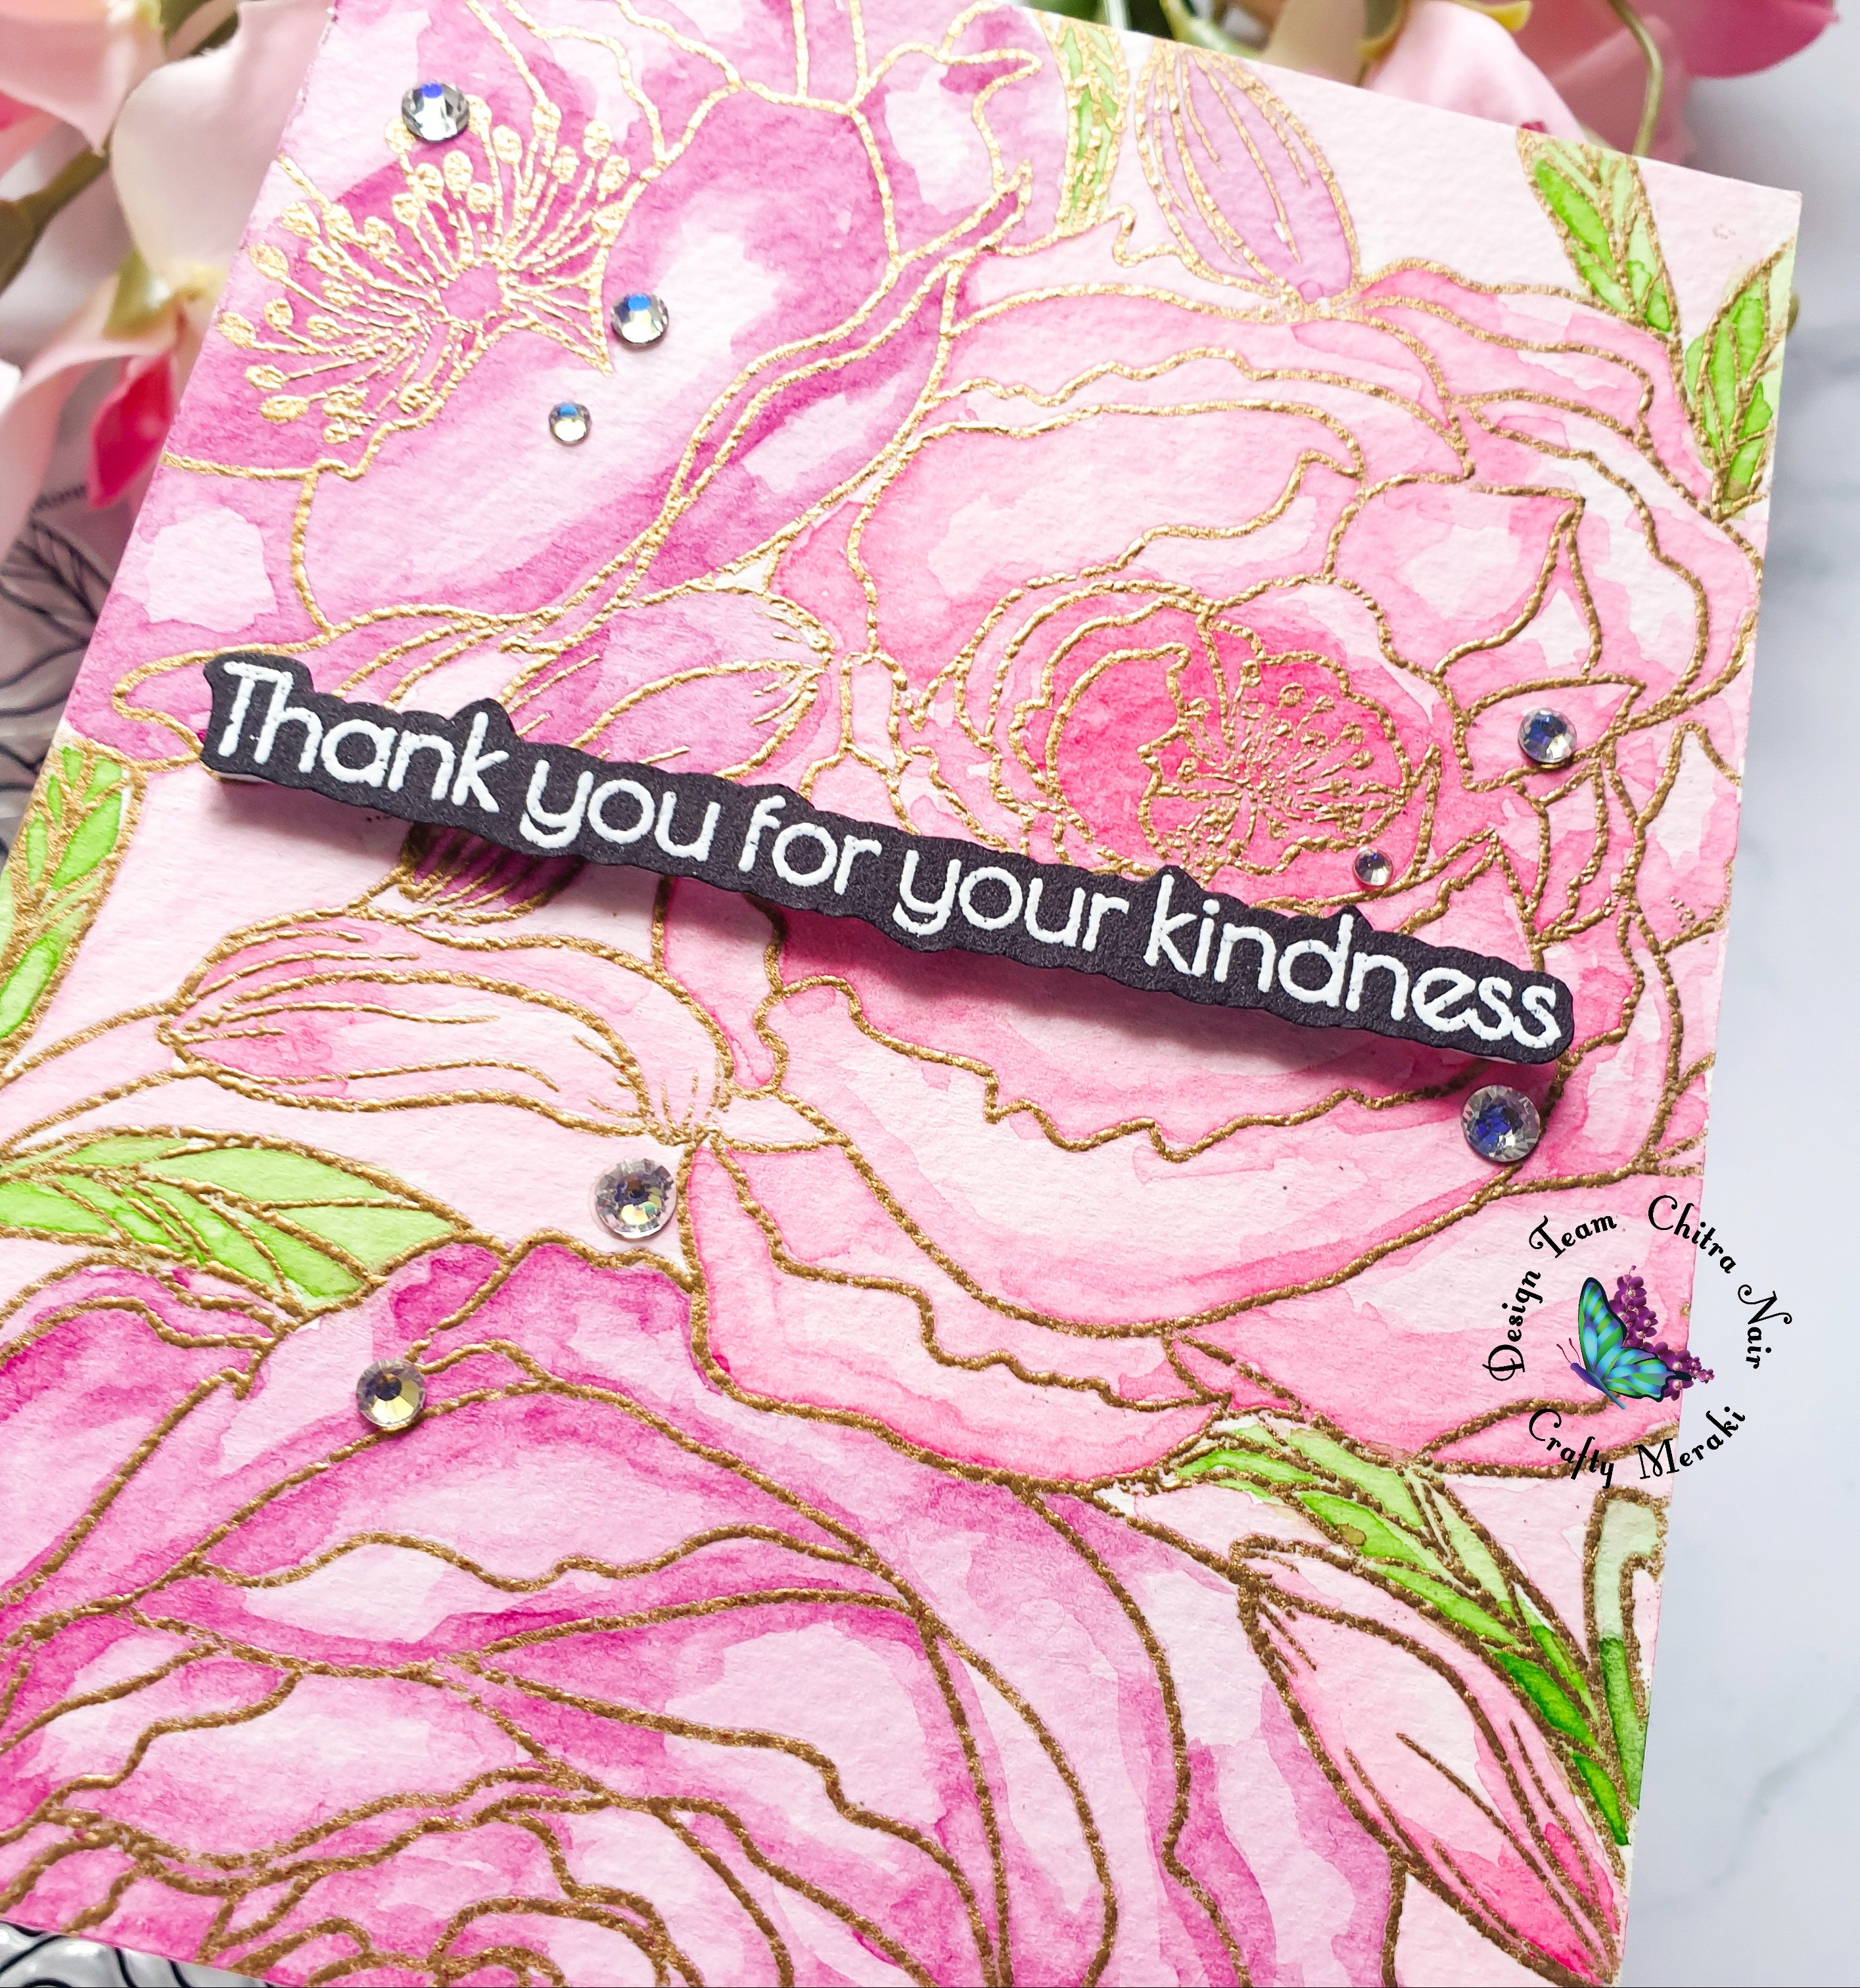 Thank you for you kindness by Chitra